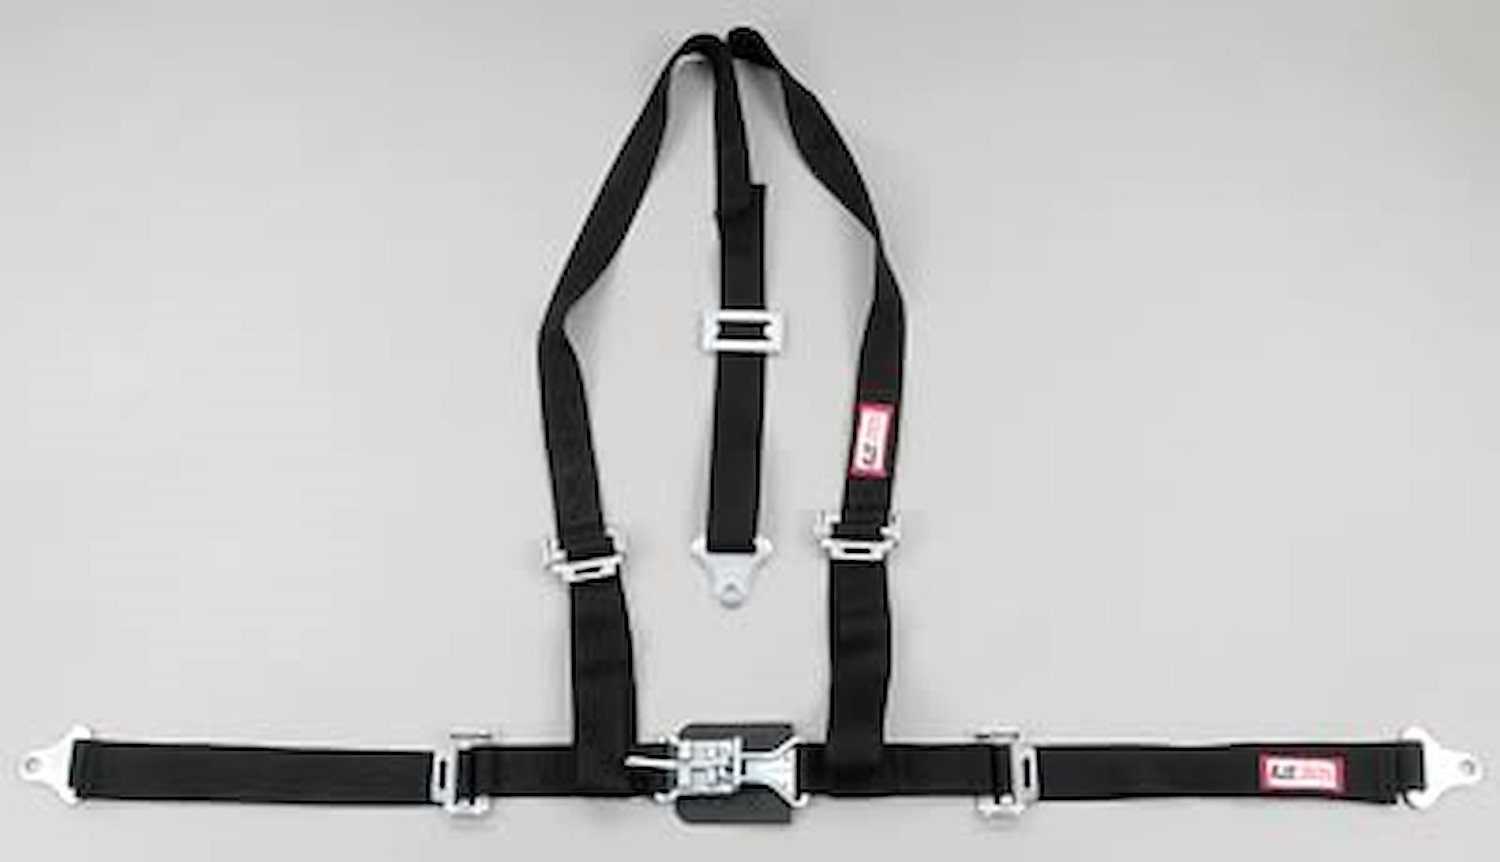 NON-SFI L&L HARNESS 3 PULL UP Lap Belt SNAP SEWN IN 2 S.H. Individual FLOOR Mount WRAP/SNAP GRAY